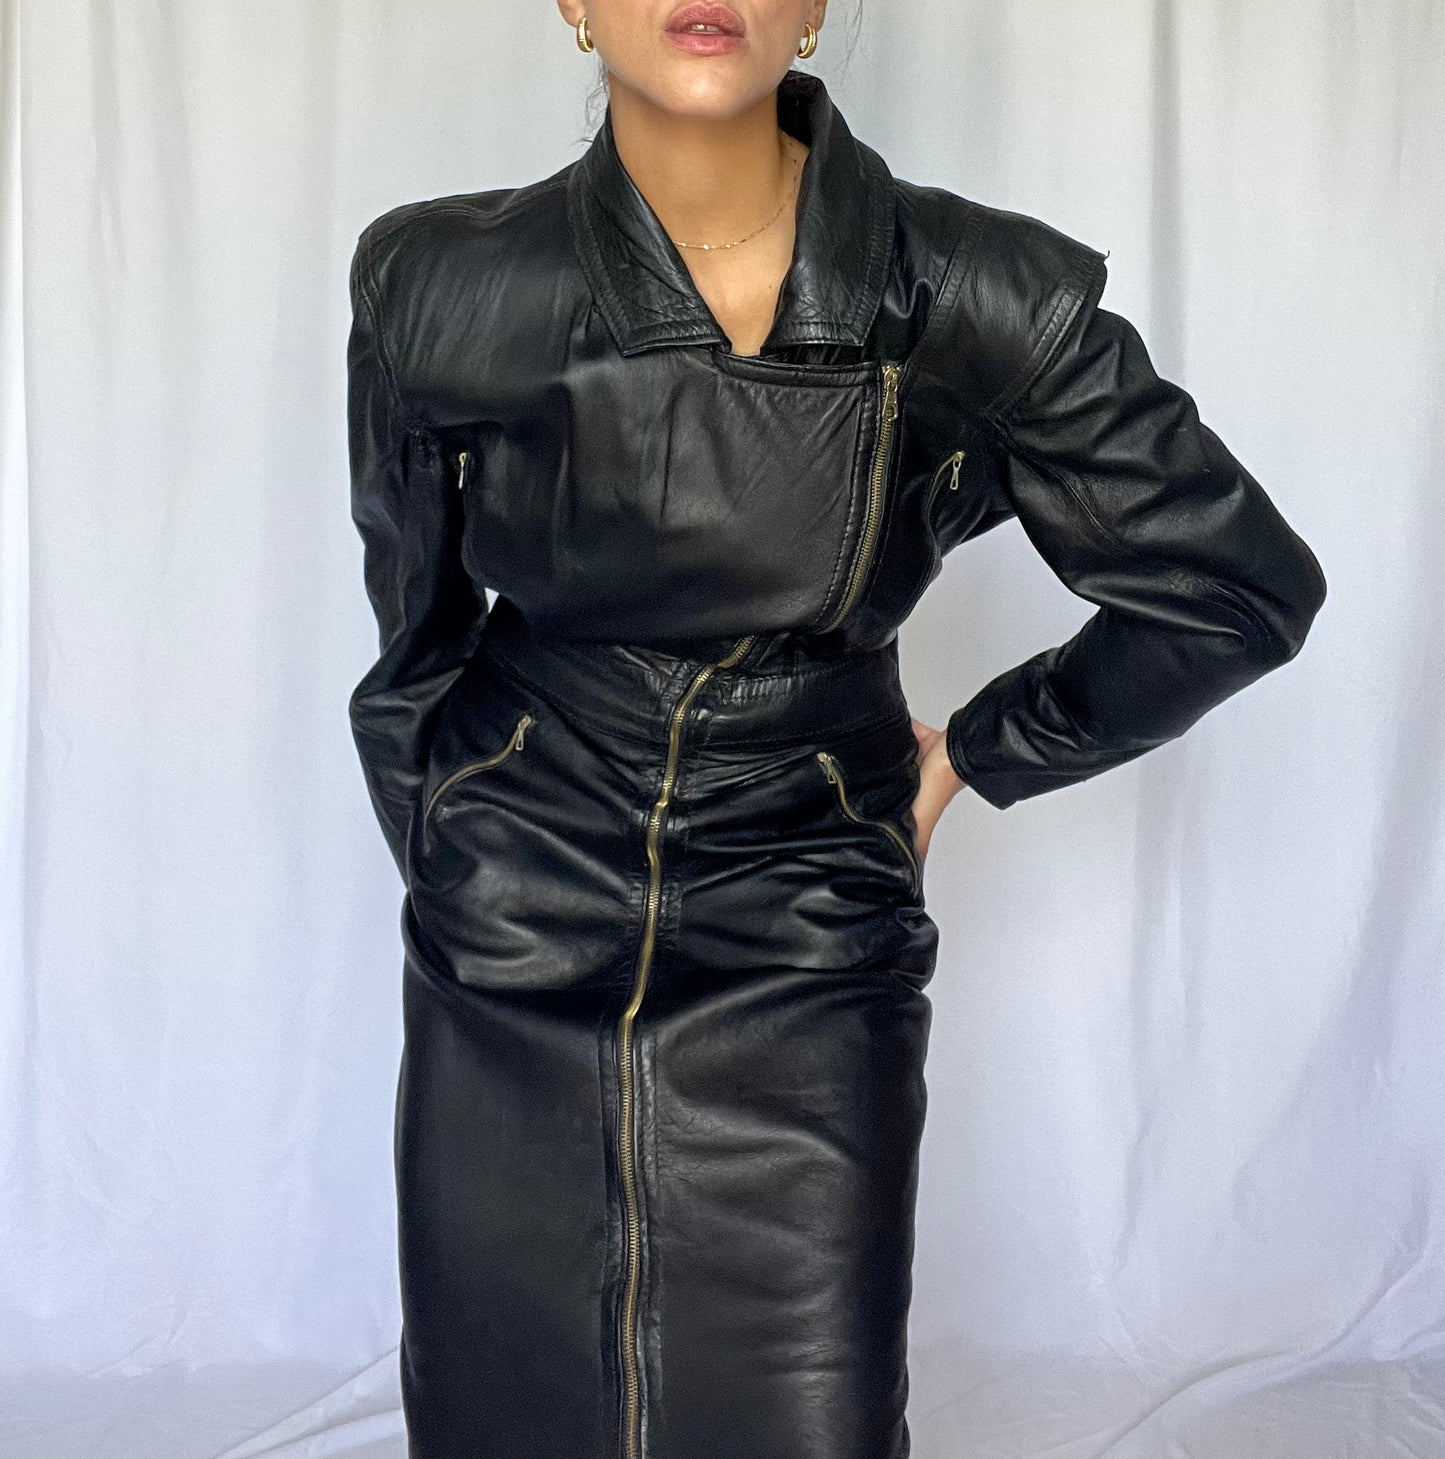 The leather dress